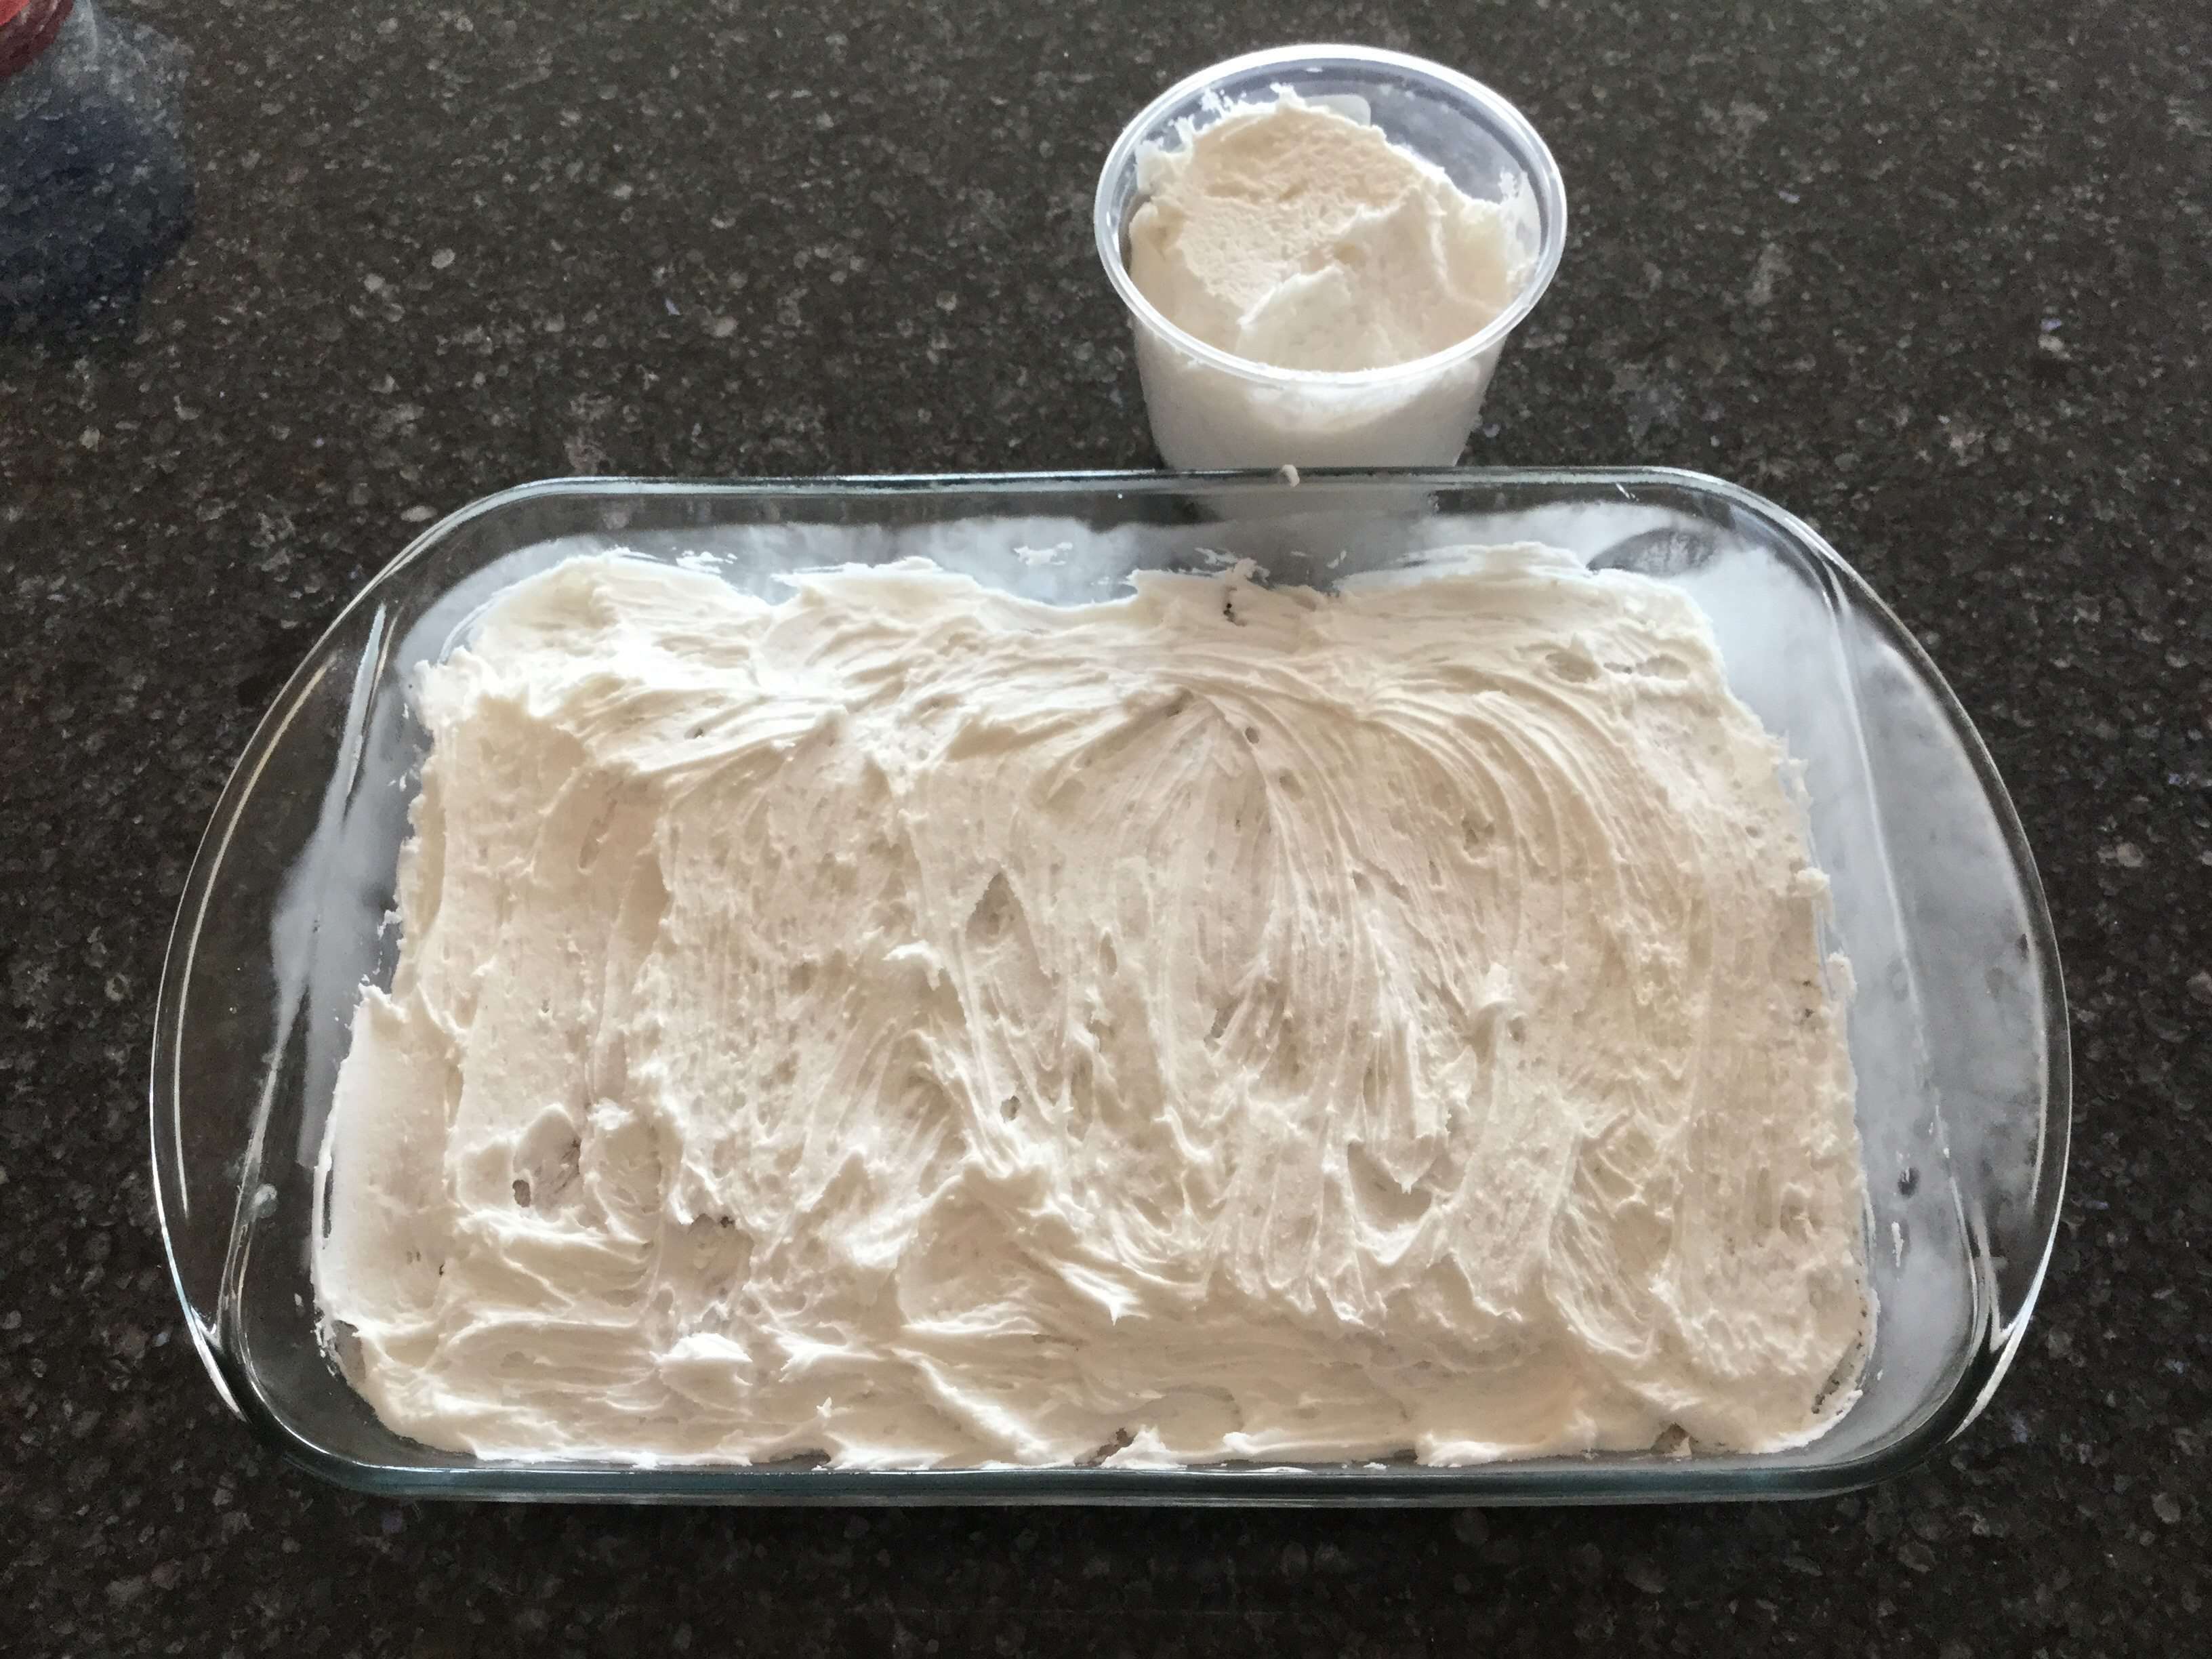 After the ice cream is nice and solid, add your top.  I usually use cool whip and it spreads on nice and smooth.  My son decided he wanted frosting.  Spread which ever you choose and place in the freezer.